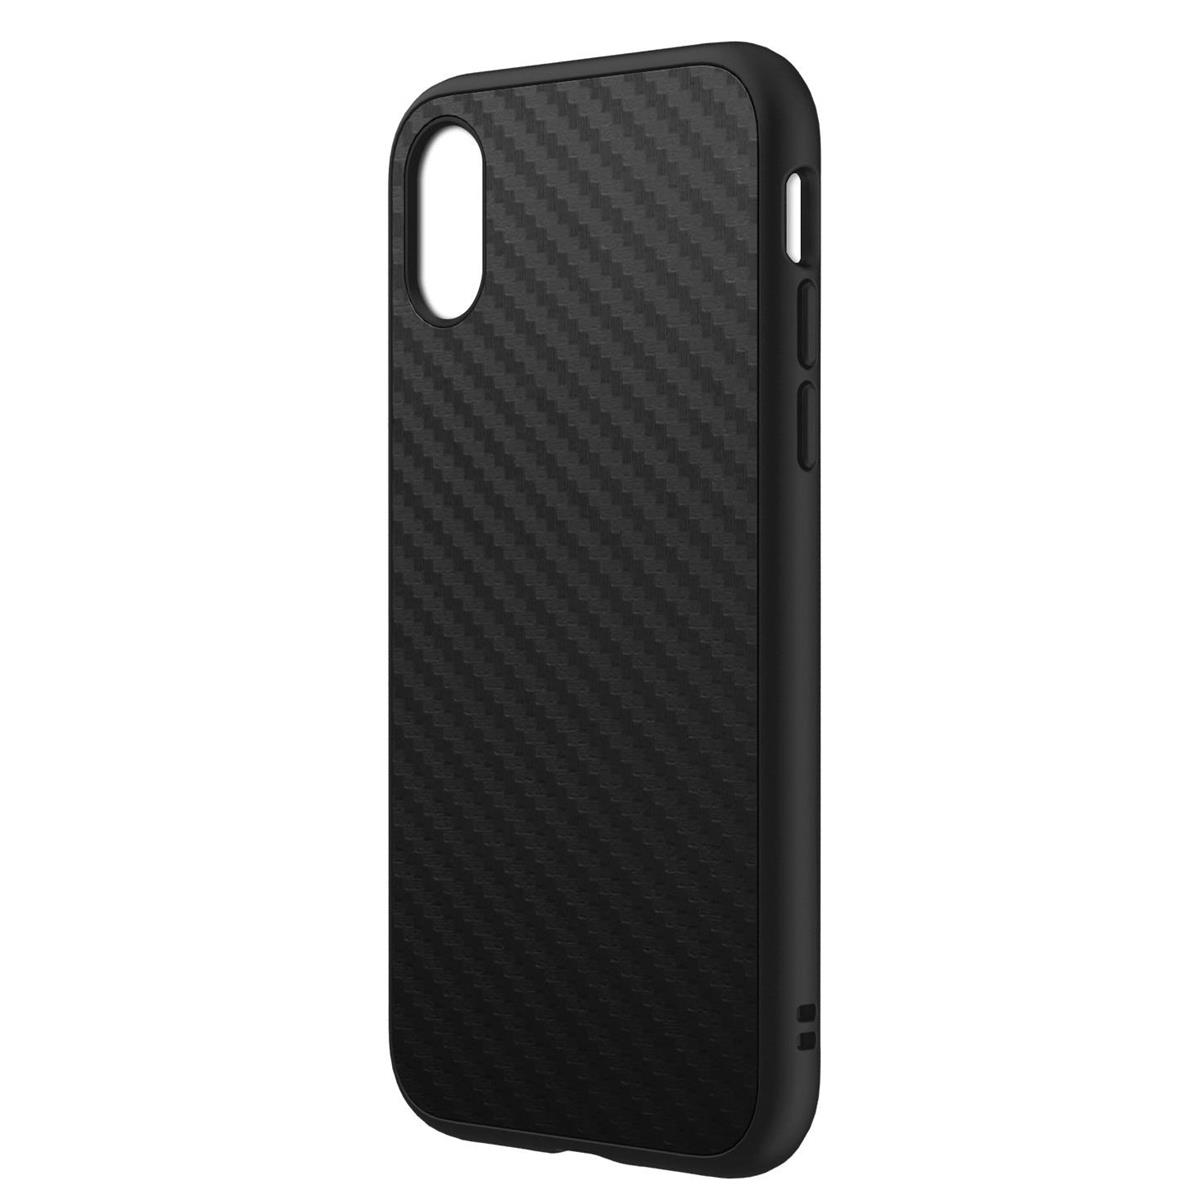 Image of RhinoShield SolidSuit Case for iPhone X - Carbon